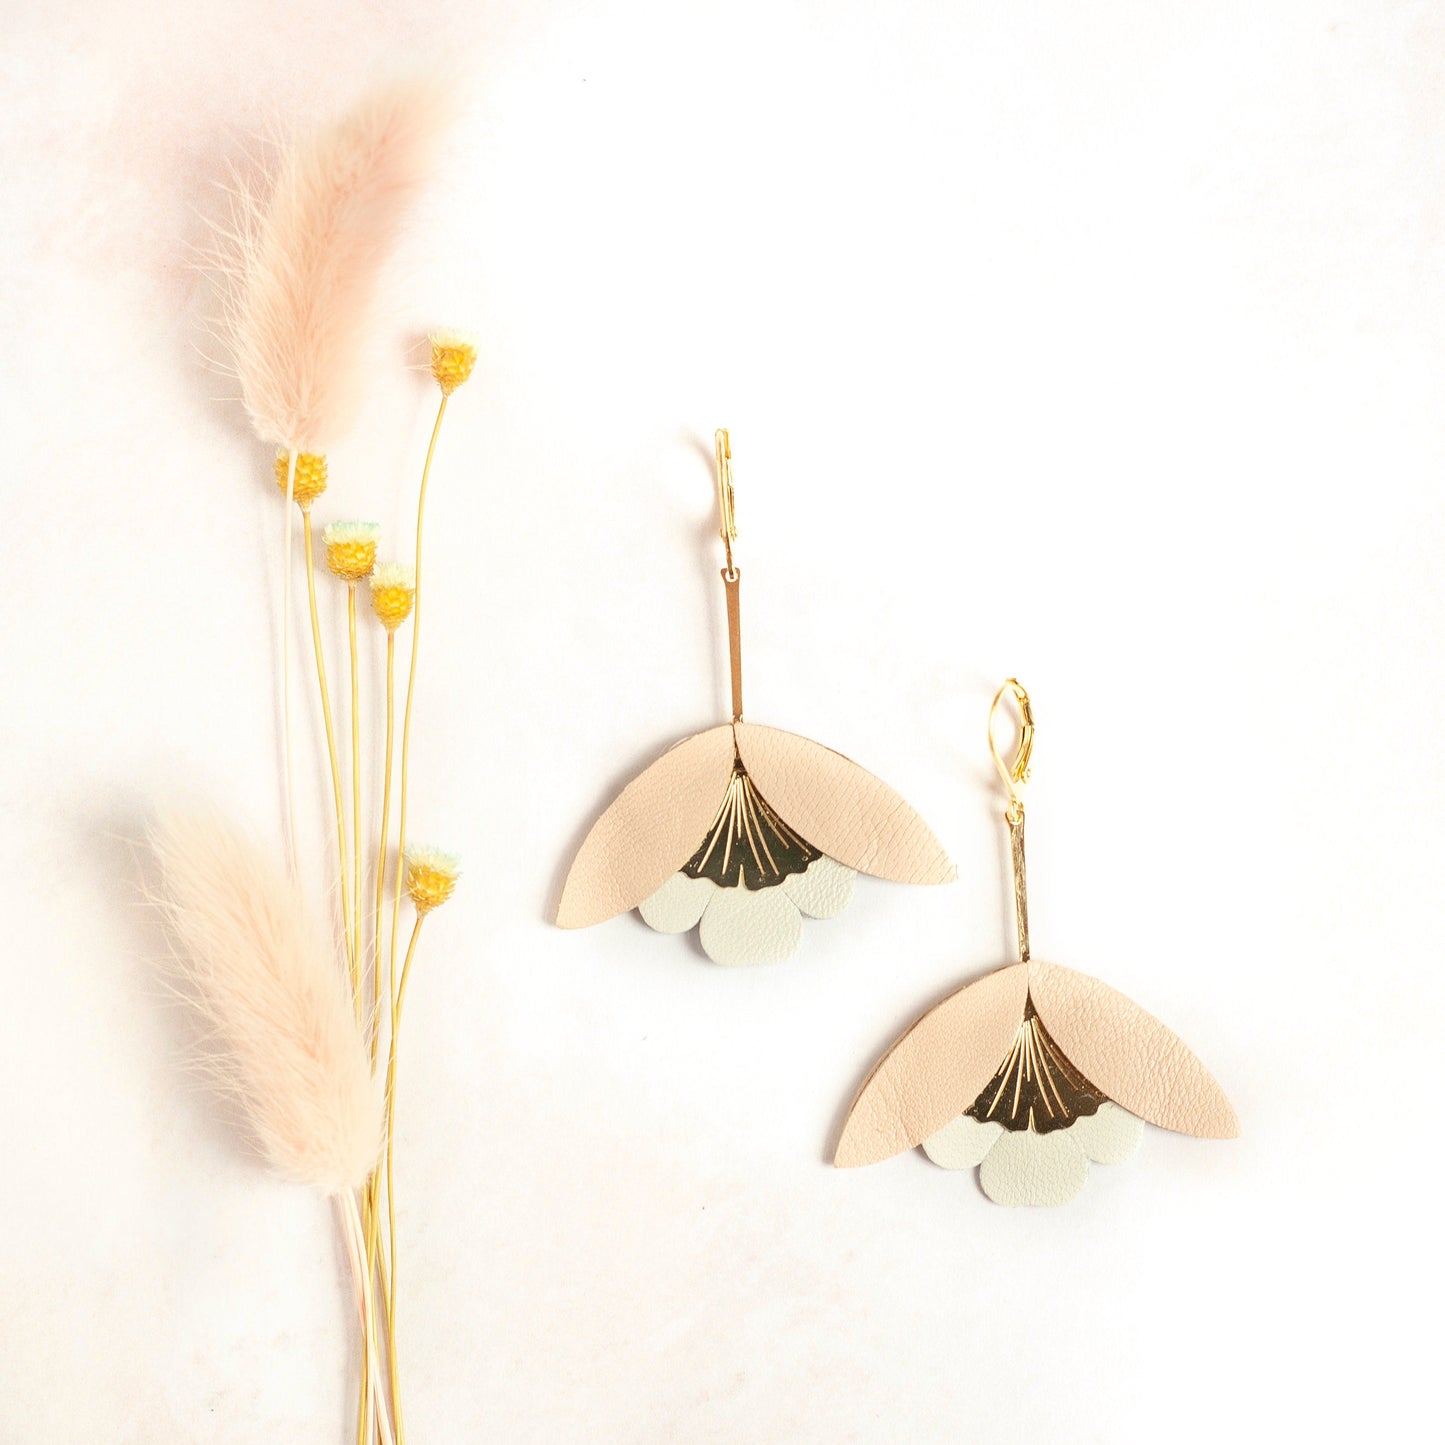 Ginkgo Flower earrings in white leather and flesh pink